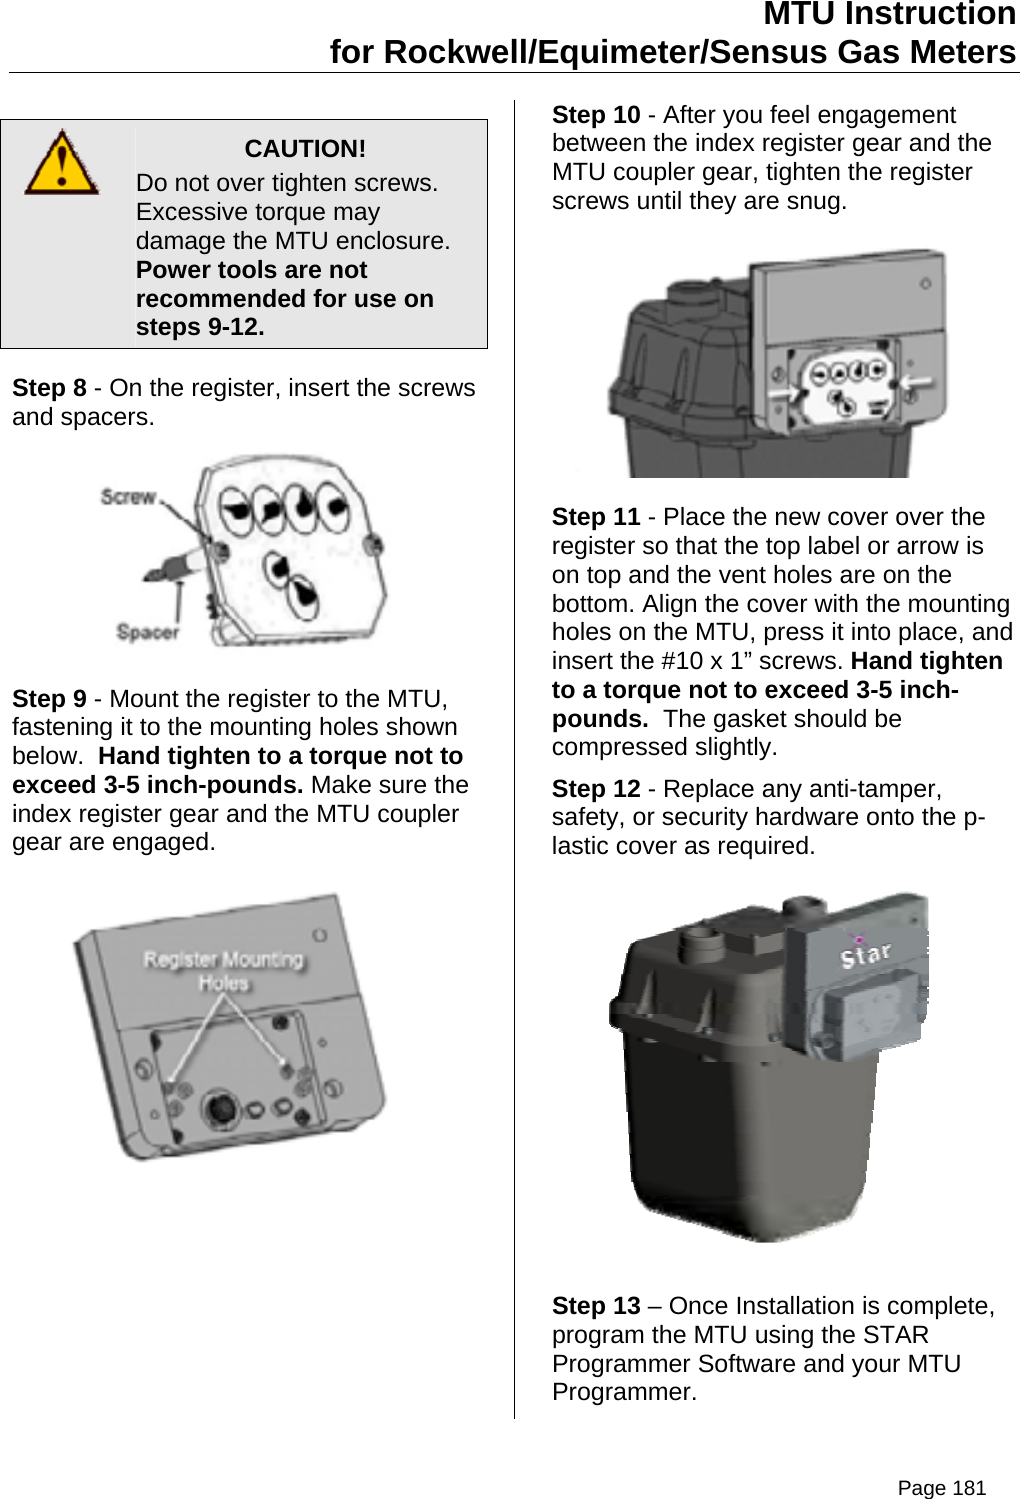 MTU Instruction for Rockwell/Equimeter/Sensus Gas Meters   CAUTION! Do not over tighten screws. Excessive torque may damage the MTU enclosure.   Power tools are not recommended for use on steps 9-12. Step 8 - On the register, insert the screws and spacers.  Step 9 - Mount the register to the MTU, fastening it to the mounting holes shown below.  Hand tighten to a torque not to exceed 3-5 inch-pounds. Make sure the index register gear and the MTU coupler gear are engaged.  Step 10 - After you feel engagement between the index register gear and the MTU coupler gear, tighten the register screws until they are snug.  Step 11 - Place the new cover over the register so that the top label or arrow is on top and the vent holes are on the bottom. Align the cover with the mounting holes on the MTU, press it into place, and insert the #10 x 1” screws. Hand tighten to a torque not to exceed 3-5 inch-pounds.  The gasket should be compressed slightly. Step 12 - Replace any anti-tamper, safety, or security hardware onto the p-lastic cover as required.  Step 13 – Once Installation is complete, program the MTU using the STAR Programmer Software and your MTU Programmer. Page 181